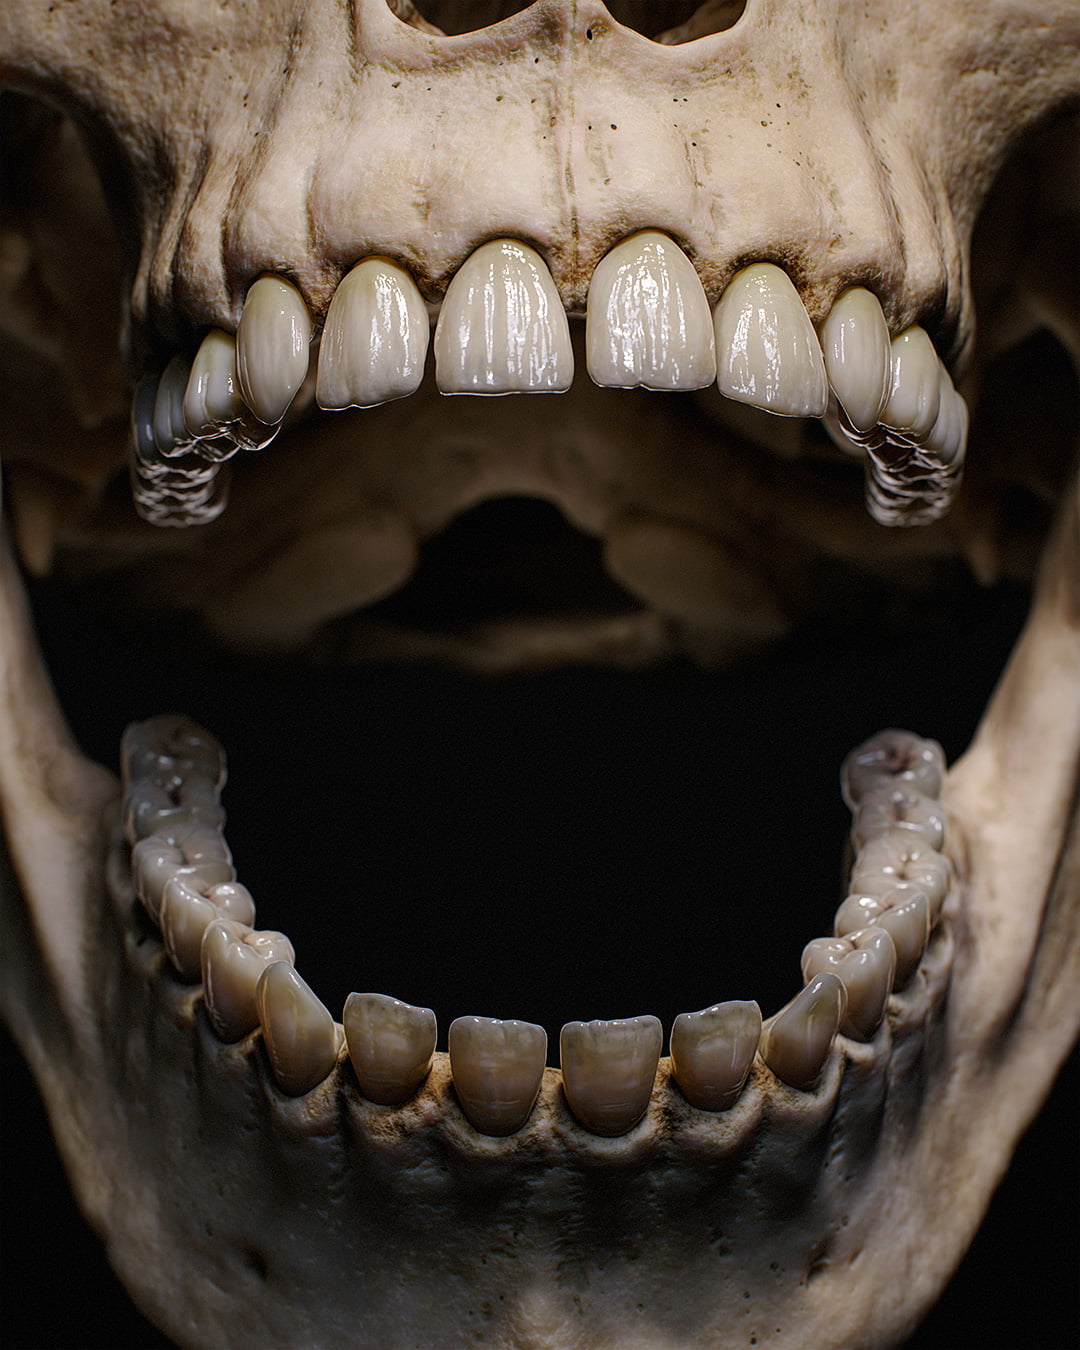 3D Teeth in Open Mouth Skull created by Artist Roy Nottage